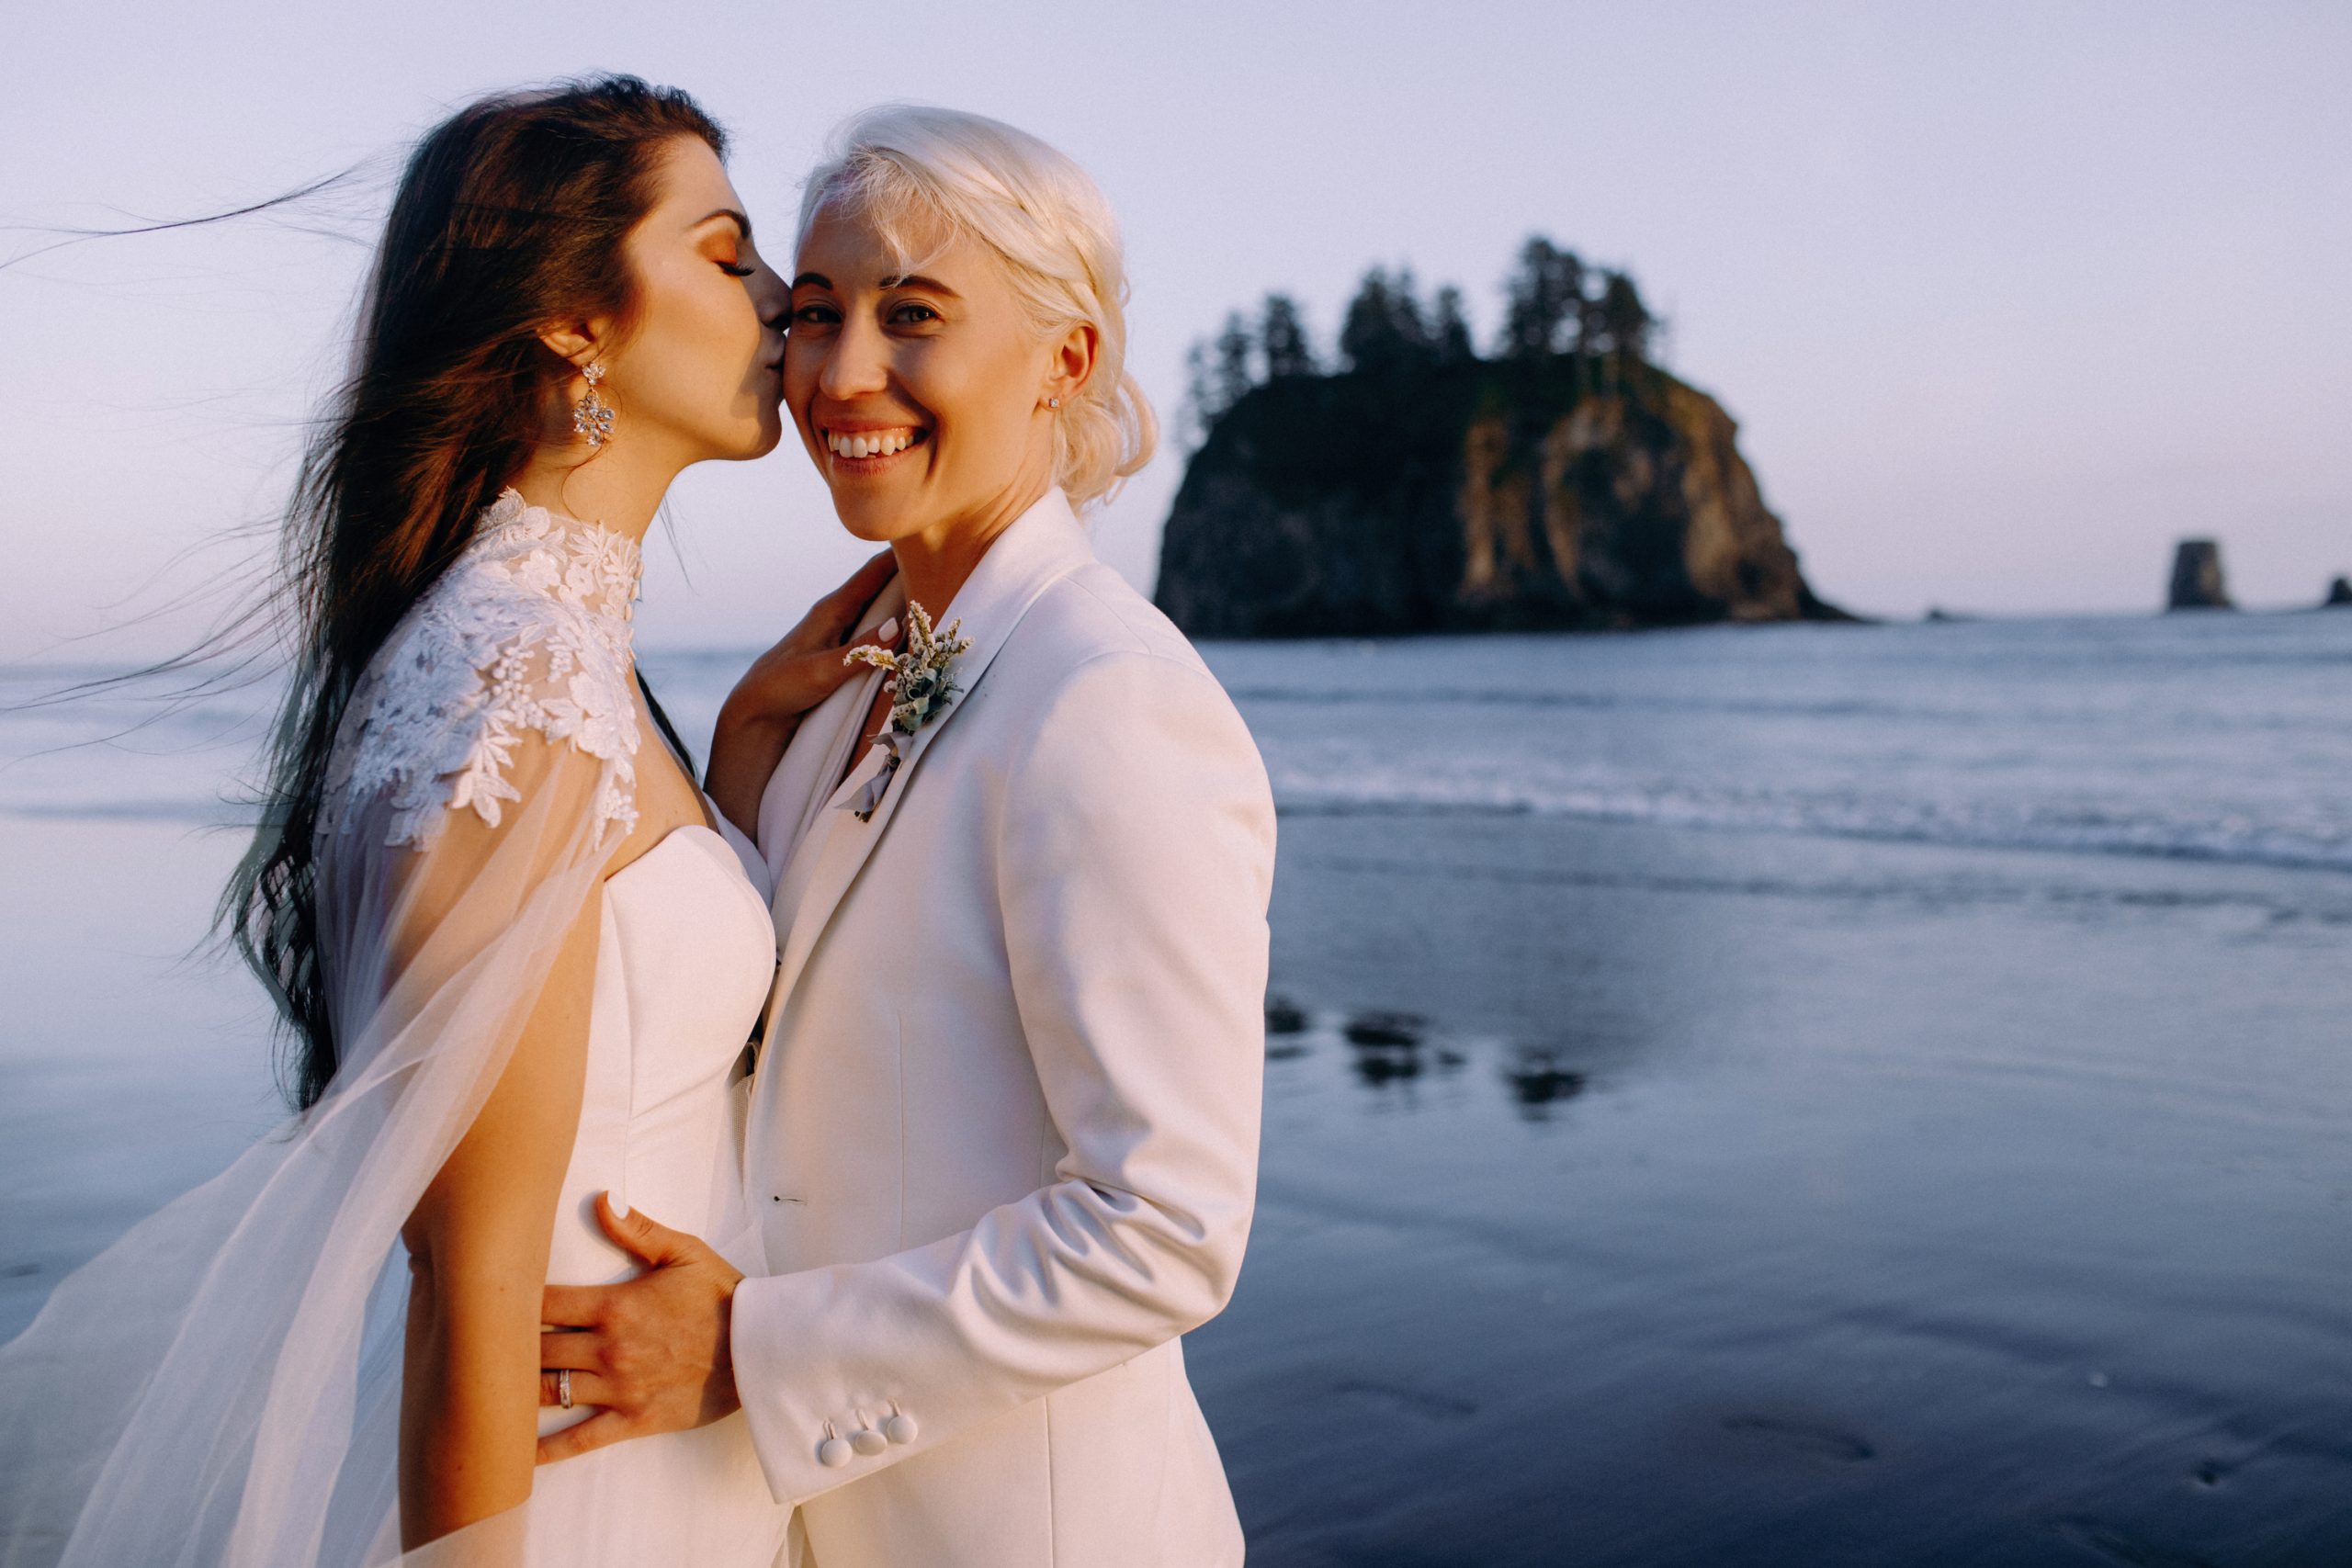 If you are a lesbian getting married, it can be tricky to pick an outfit to wear on your big day. But, these lesbian wedding outfits are perfect for your big day! A beautiful wedding suit is always a great option! 